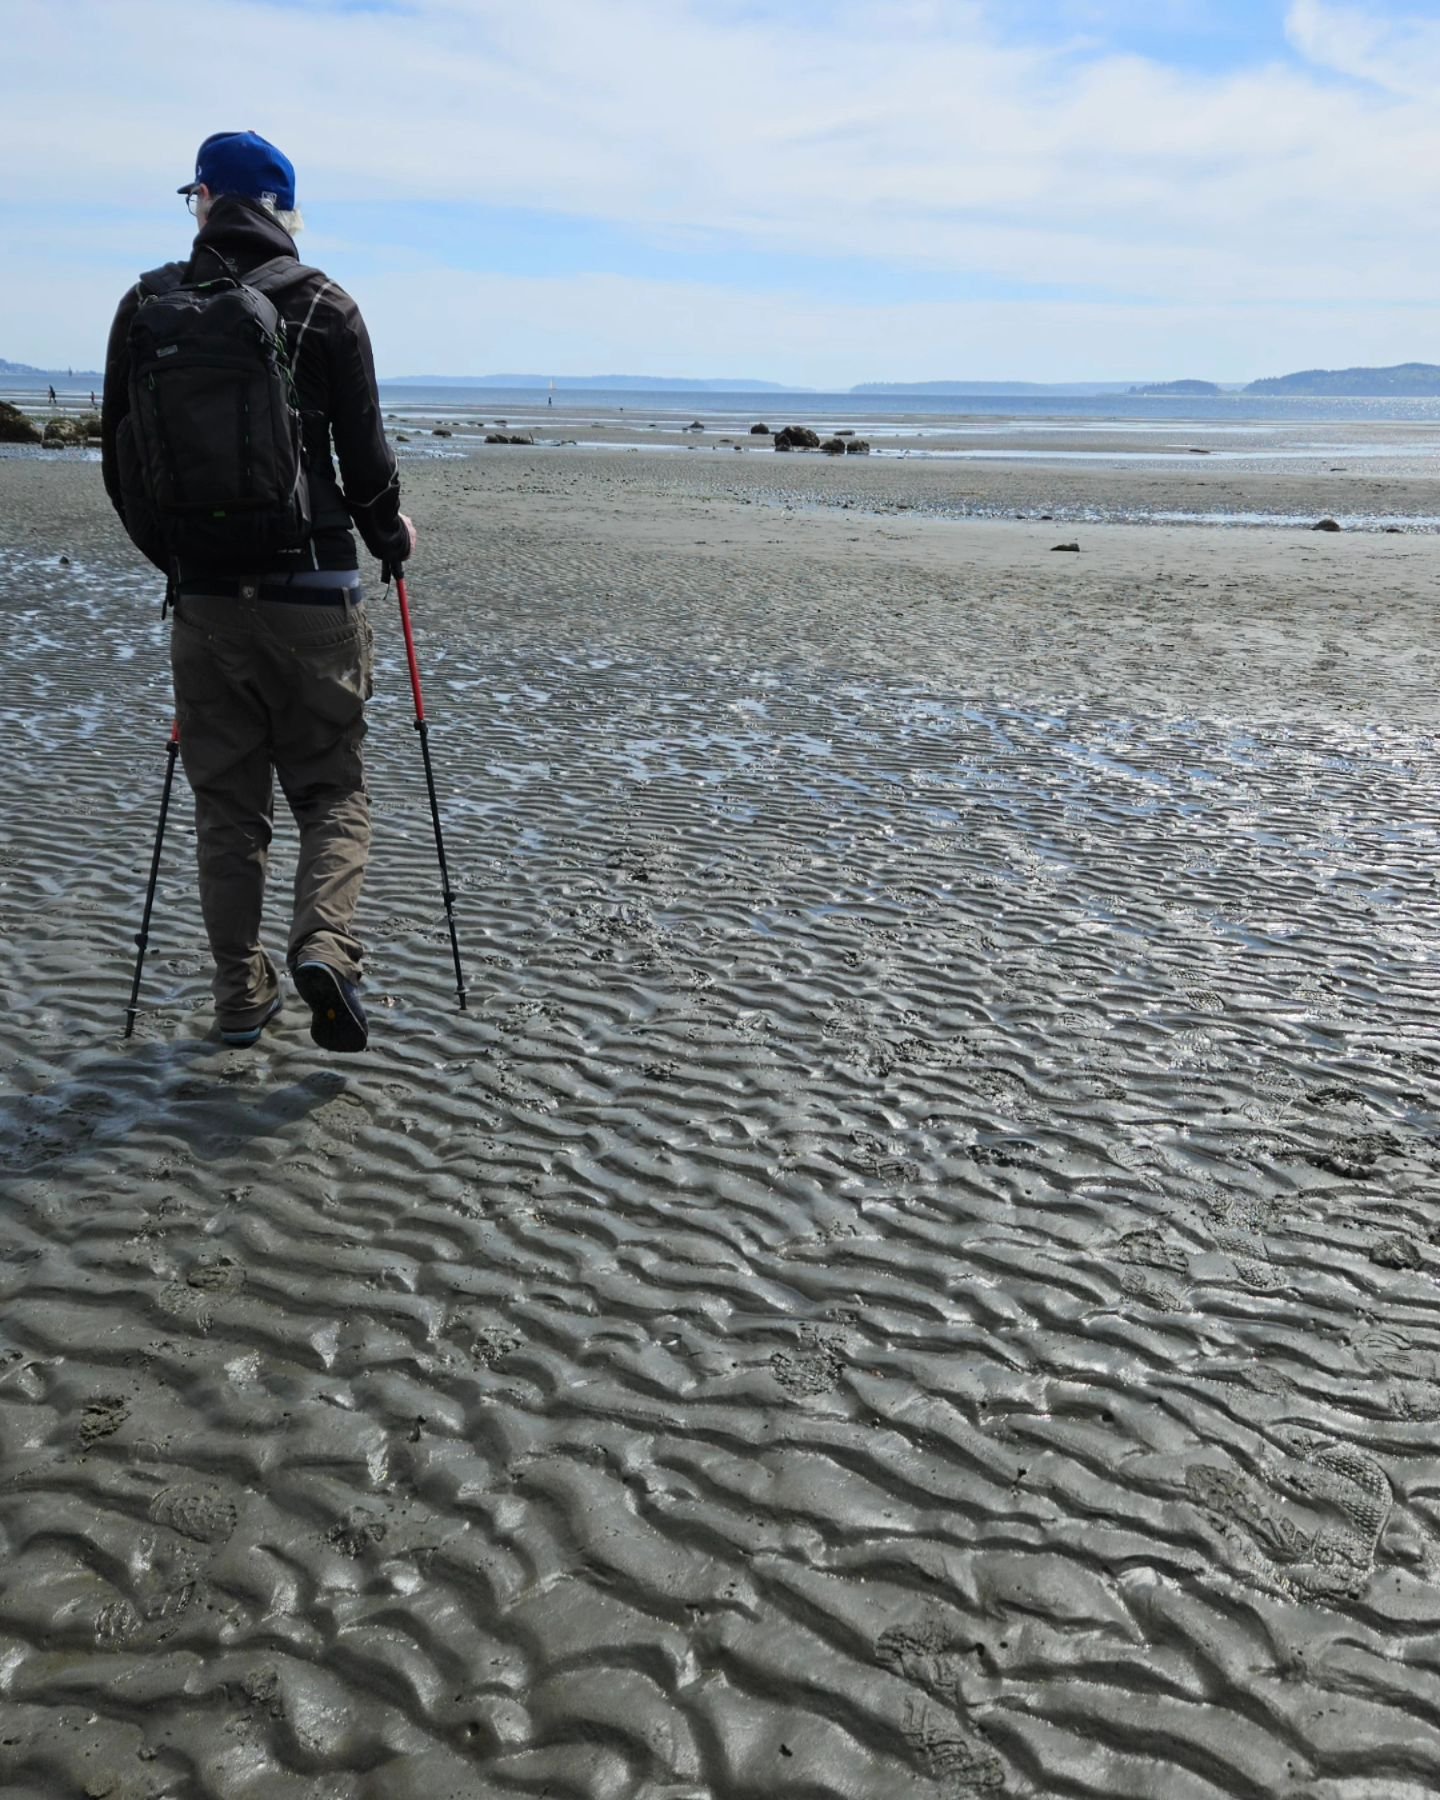 Low tide at Discovery Park was -1.4 feet today, so naturally we had to go and walk out as far as we could. Silly little walks for our silly mental health.